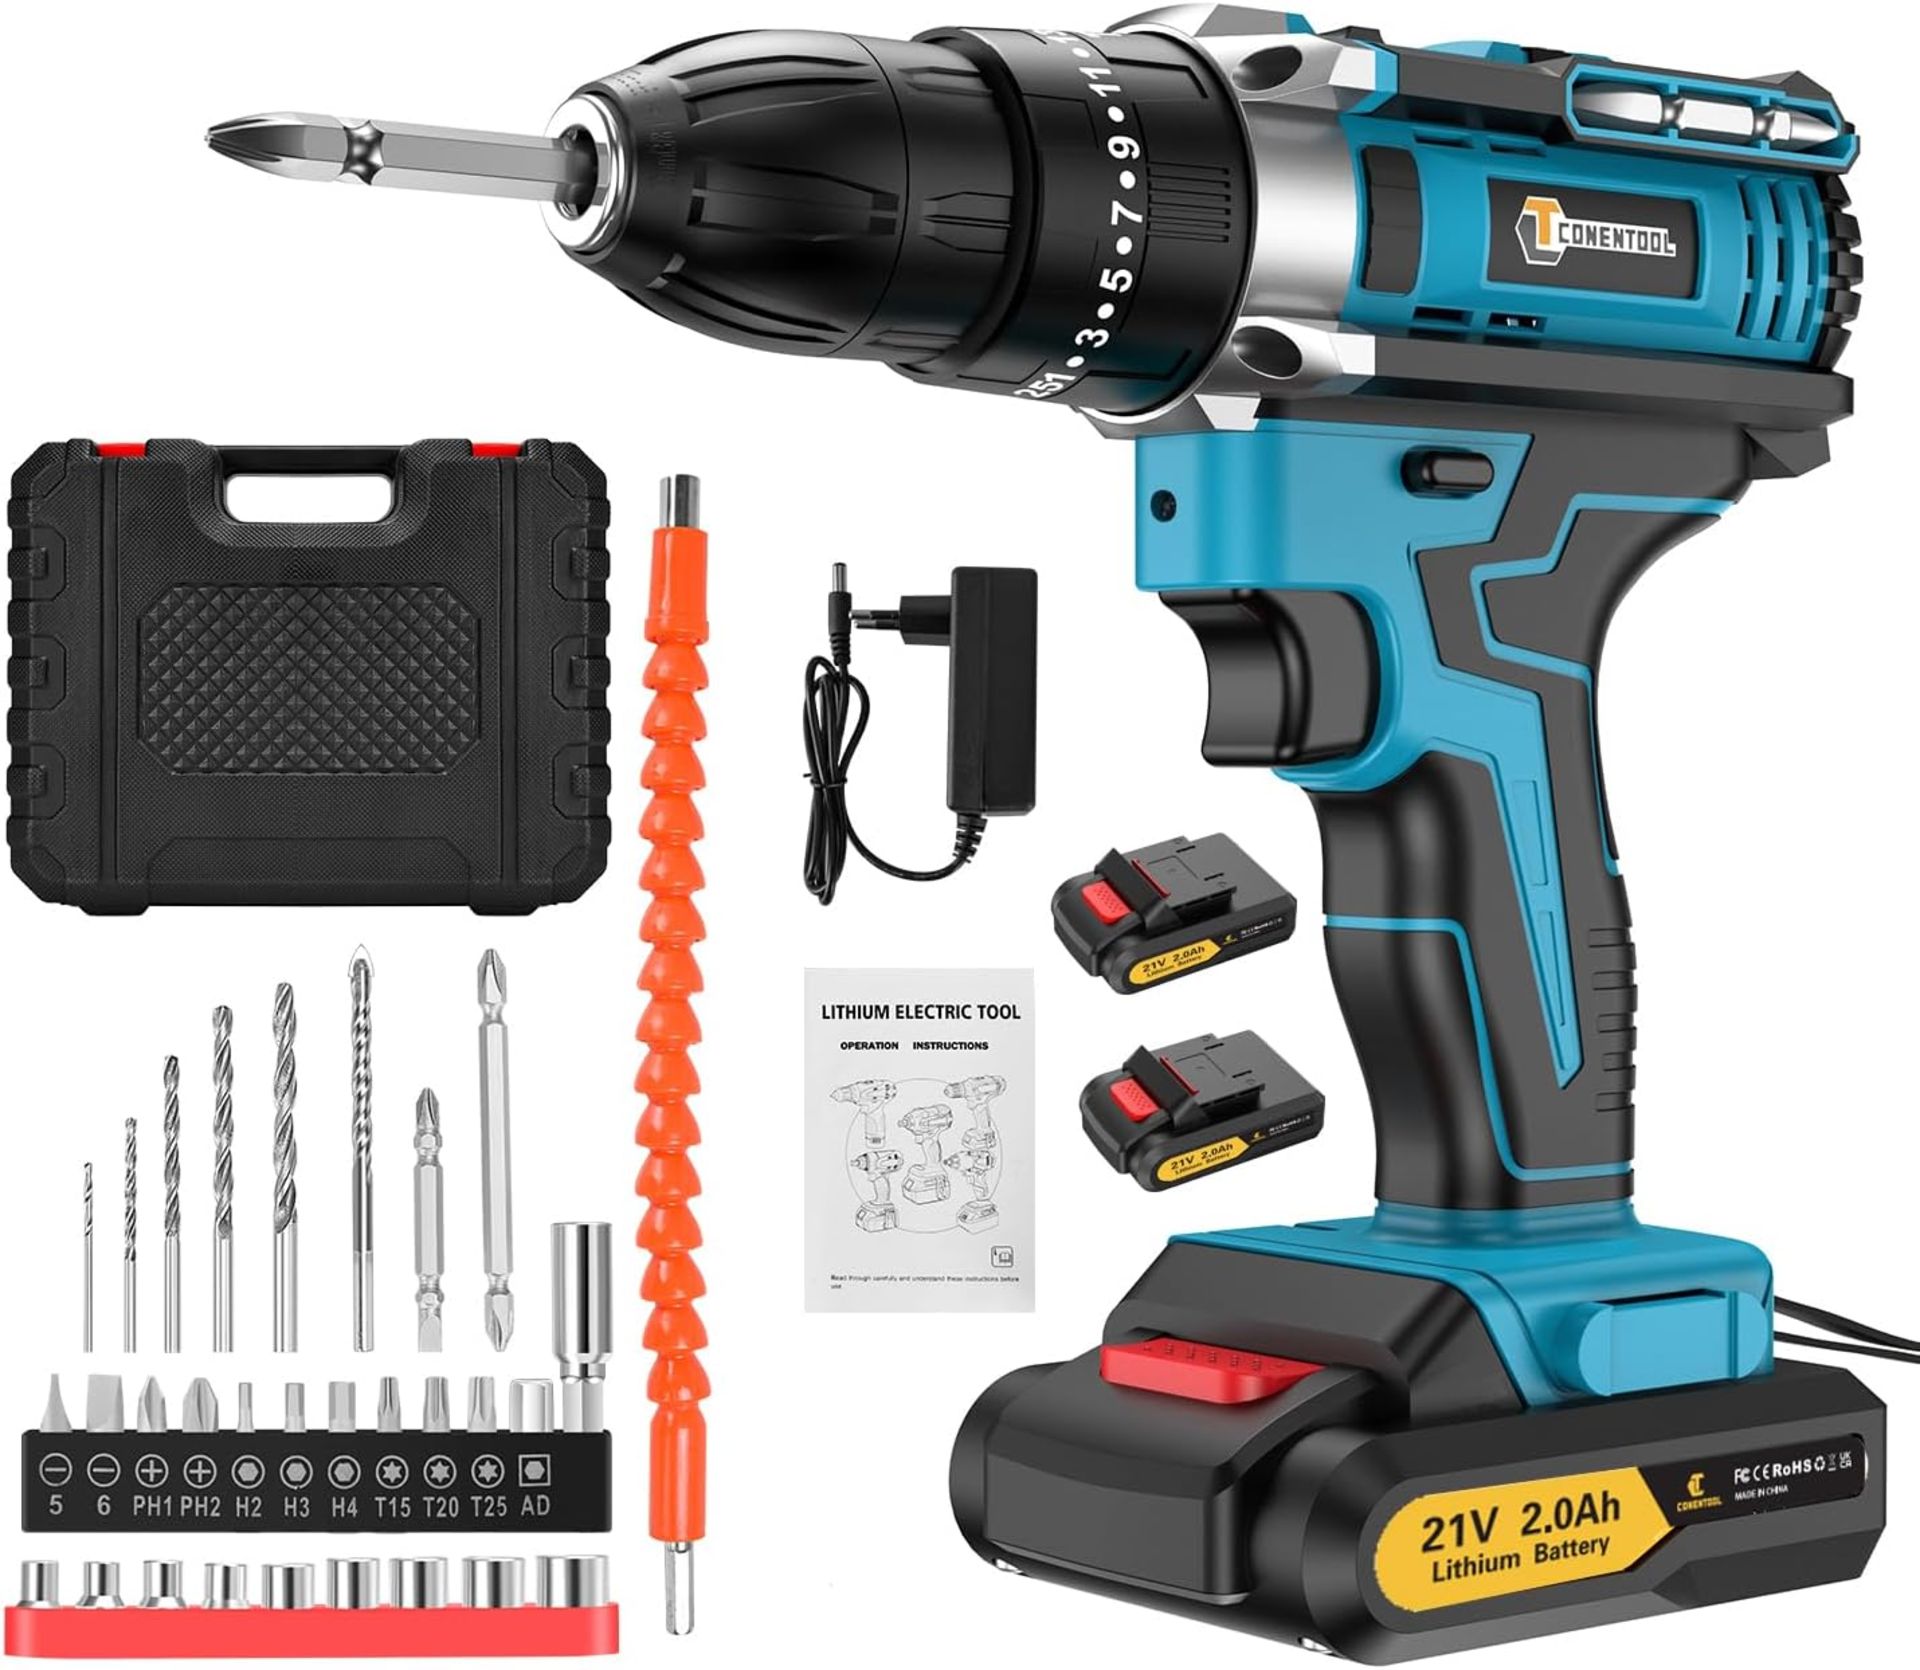 RRP £44.99 Conentool 3 in 1 Cordless Combi Drill 21V, Cordless Drill with 2X 2000mAh Batteries, 2